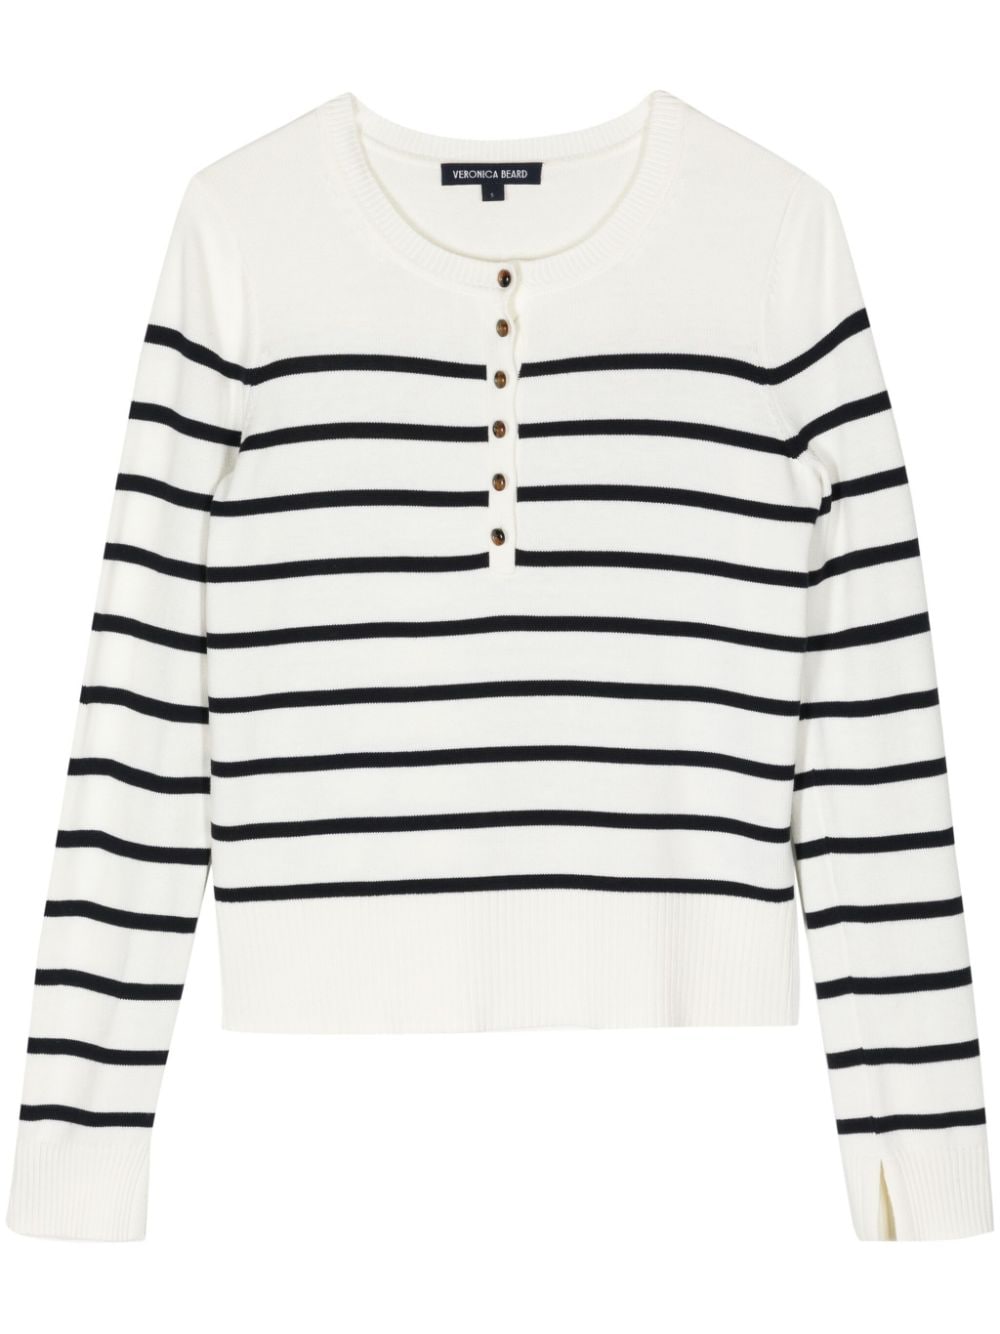 Veronica Beard Dianora striped knitted top - Weiß